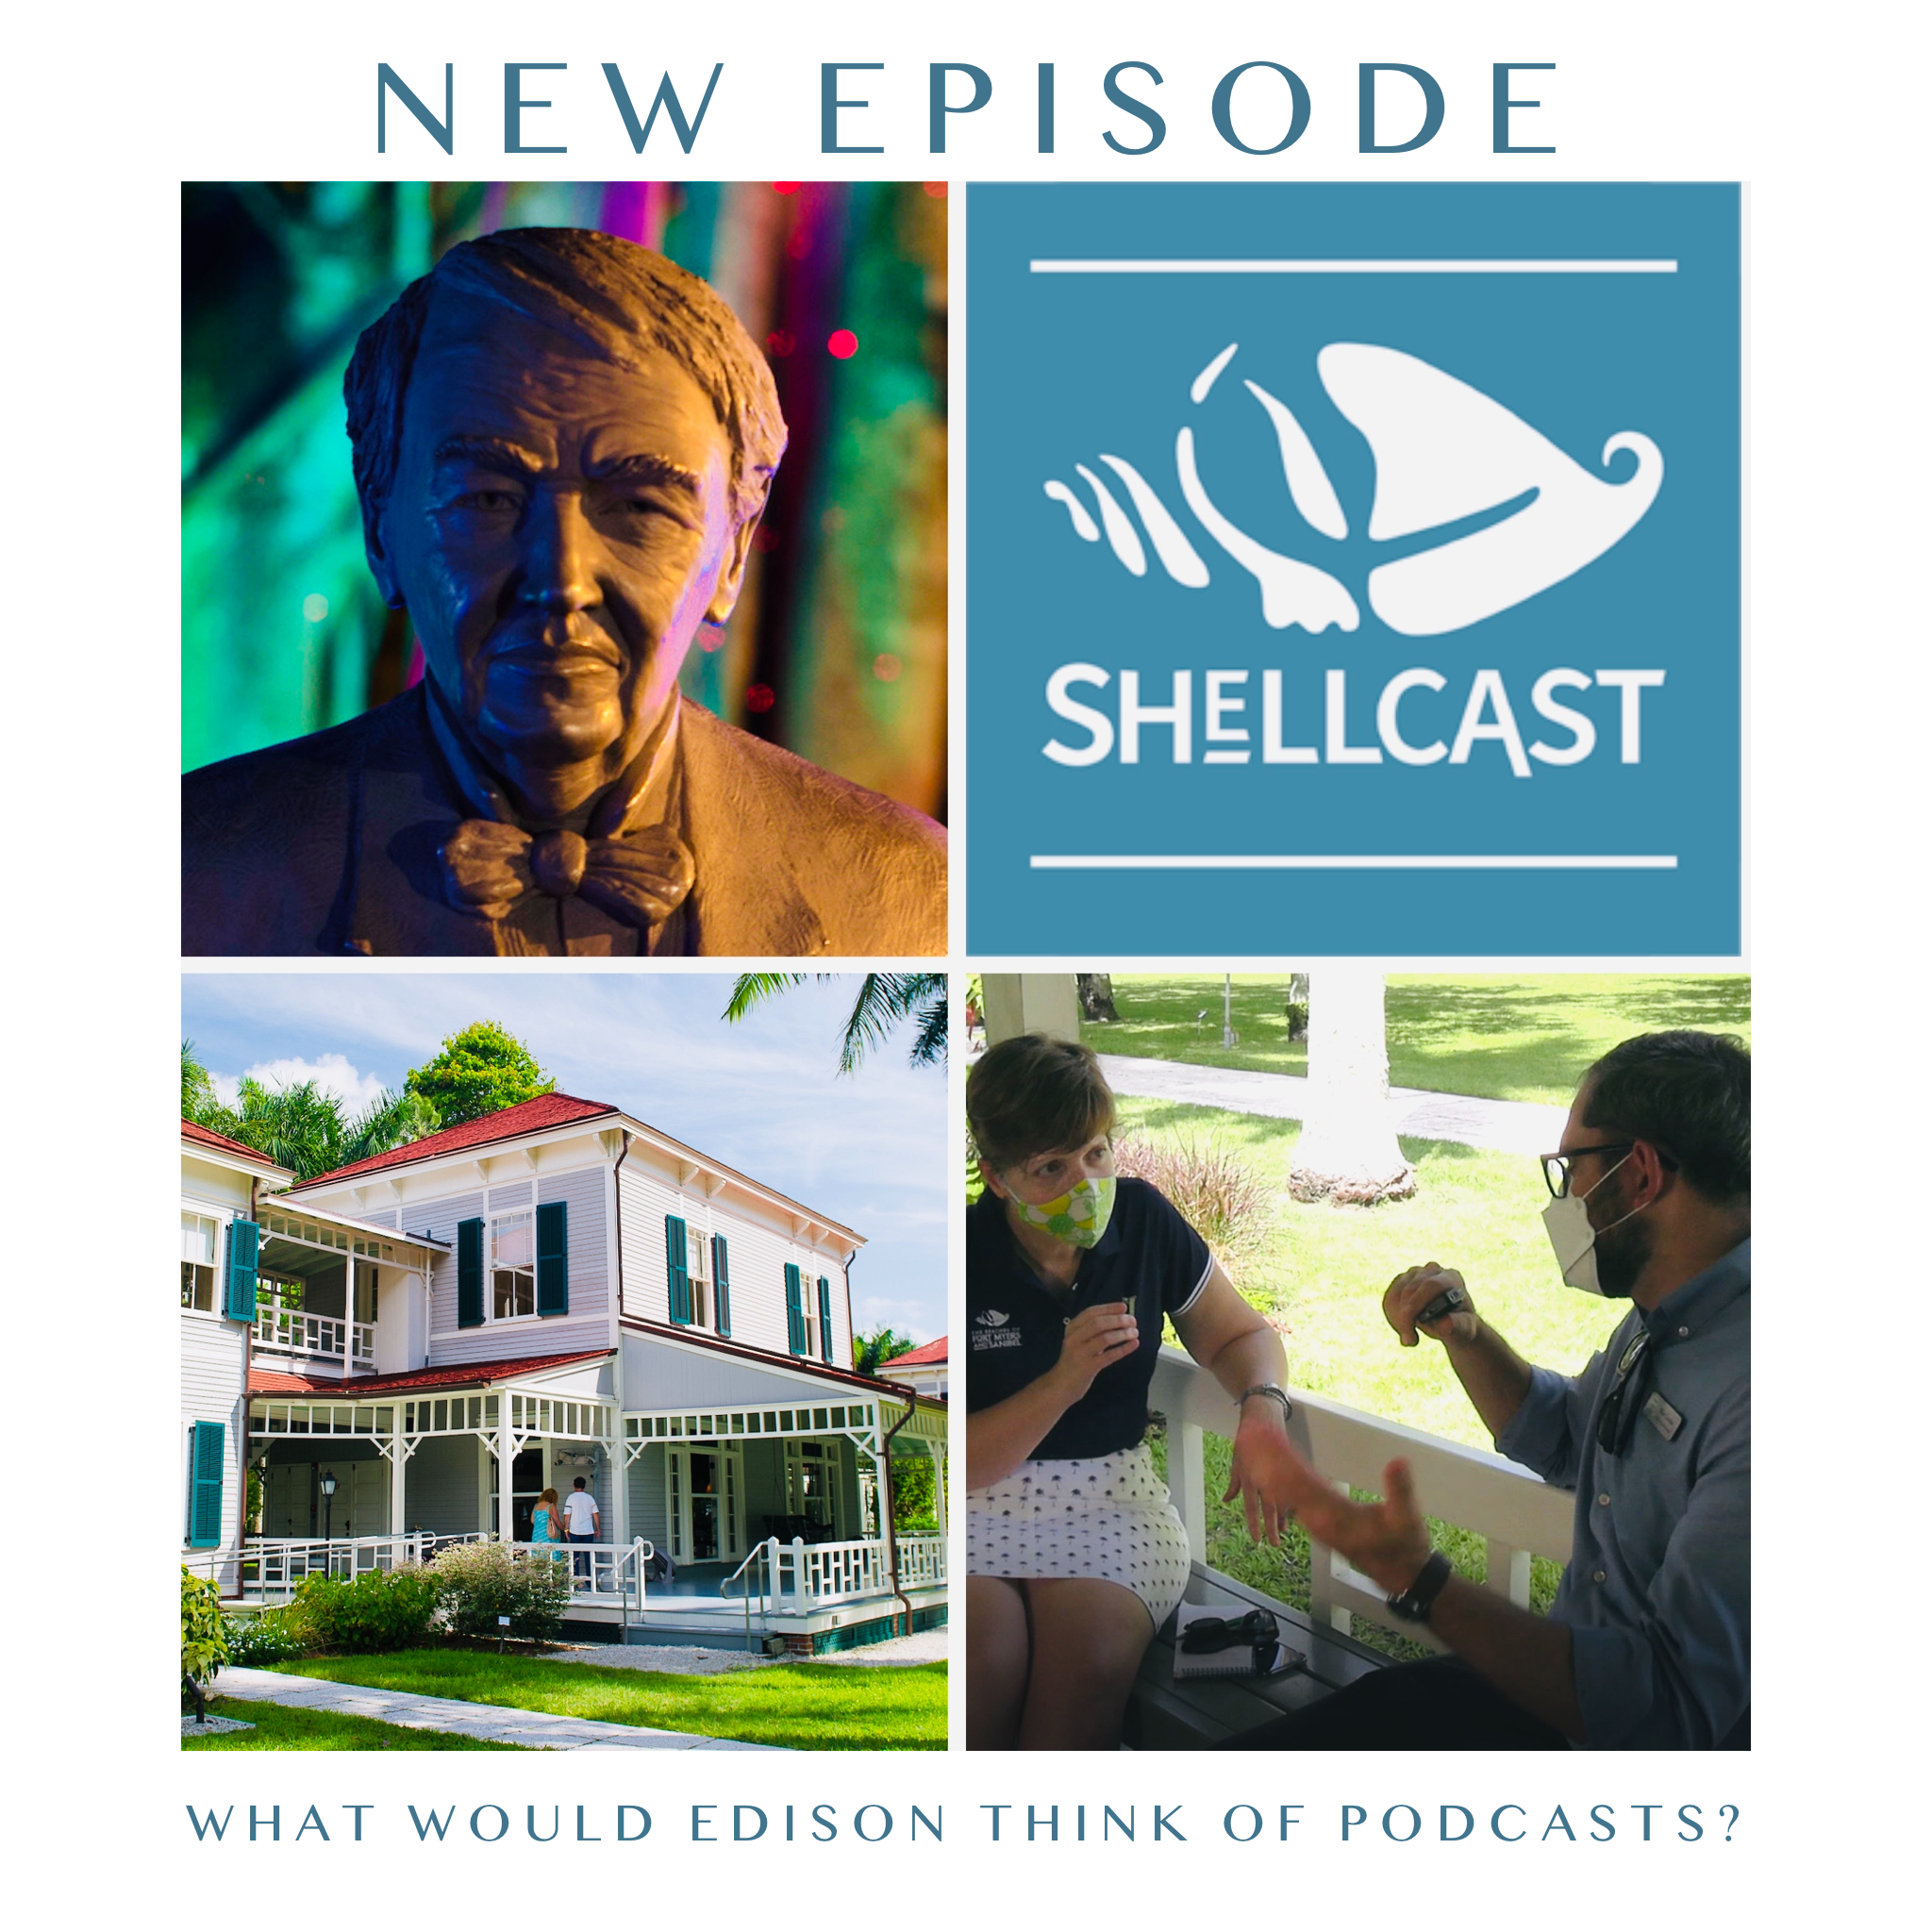 Shellcast visits Edison and Ford Winter Estates